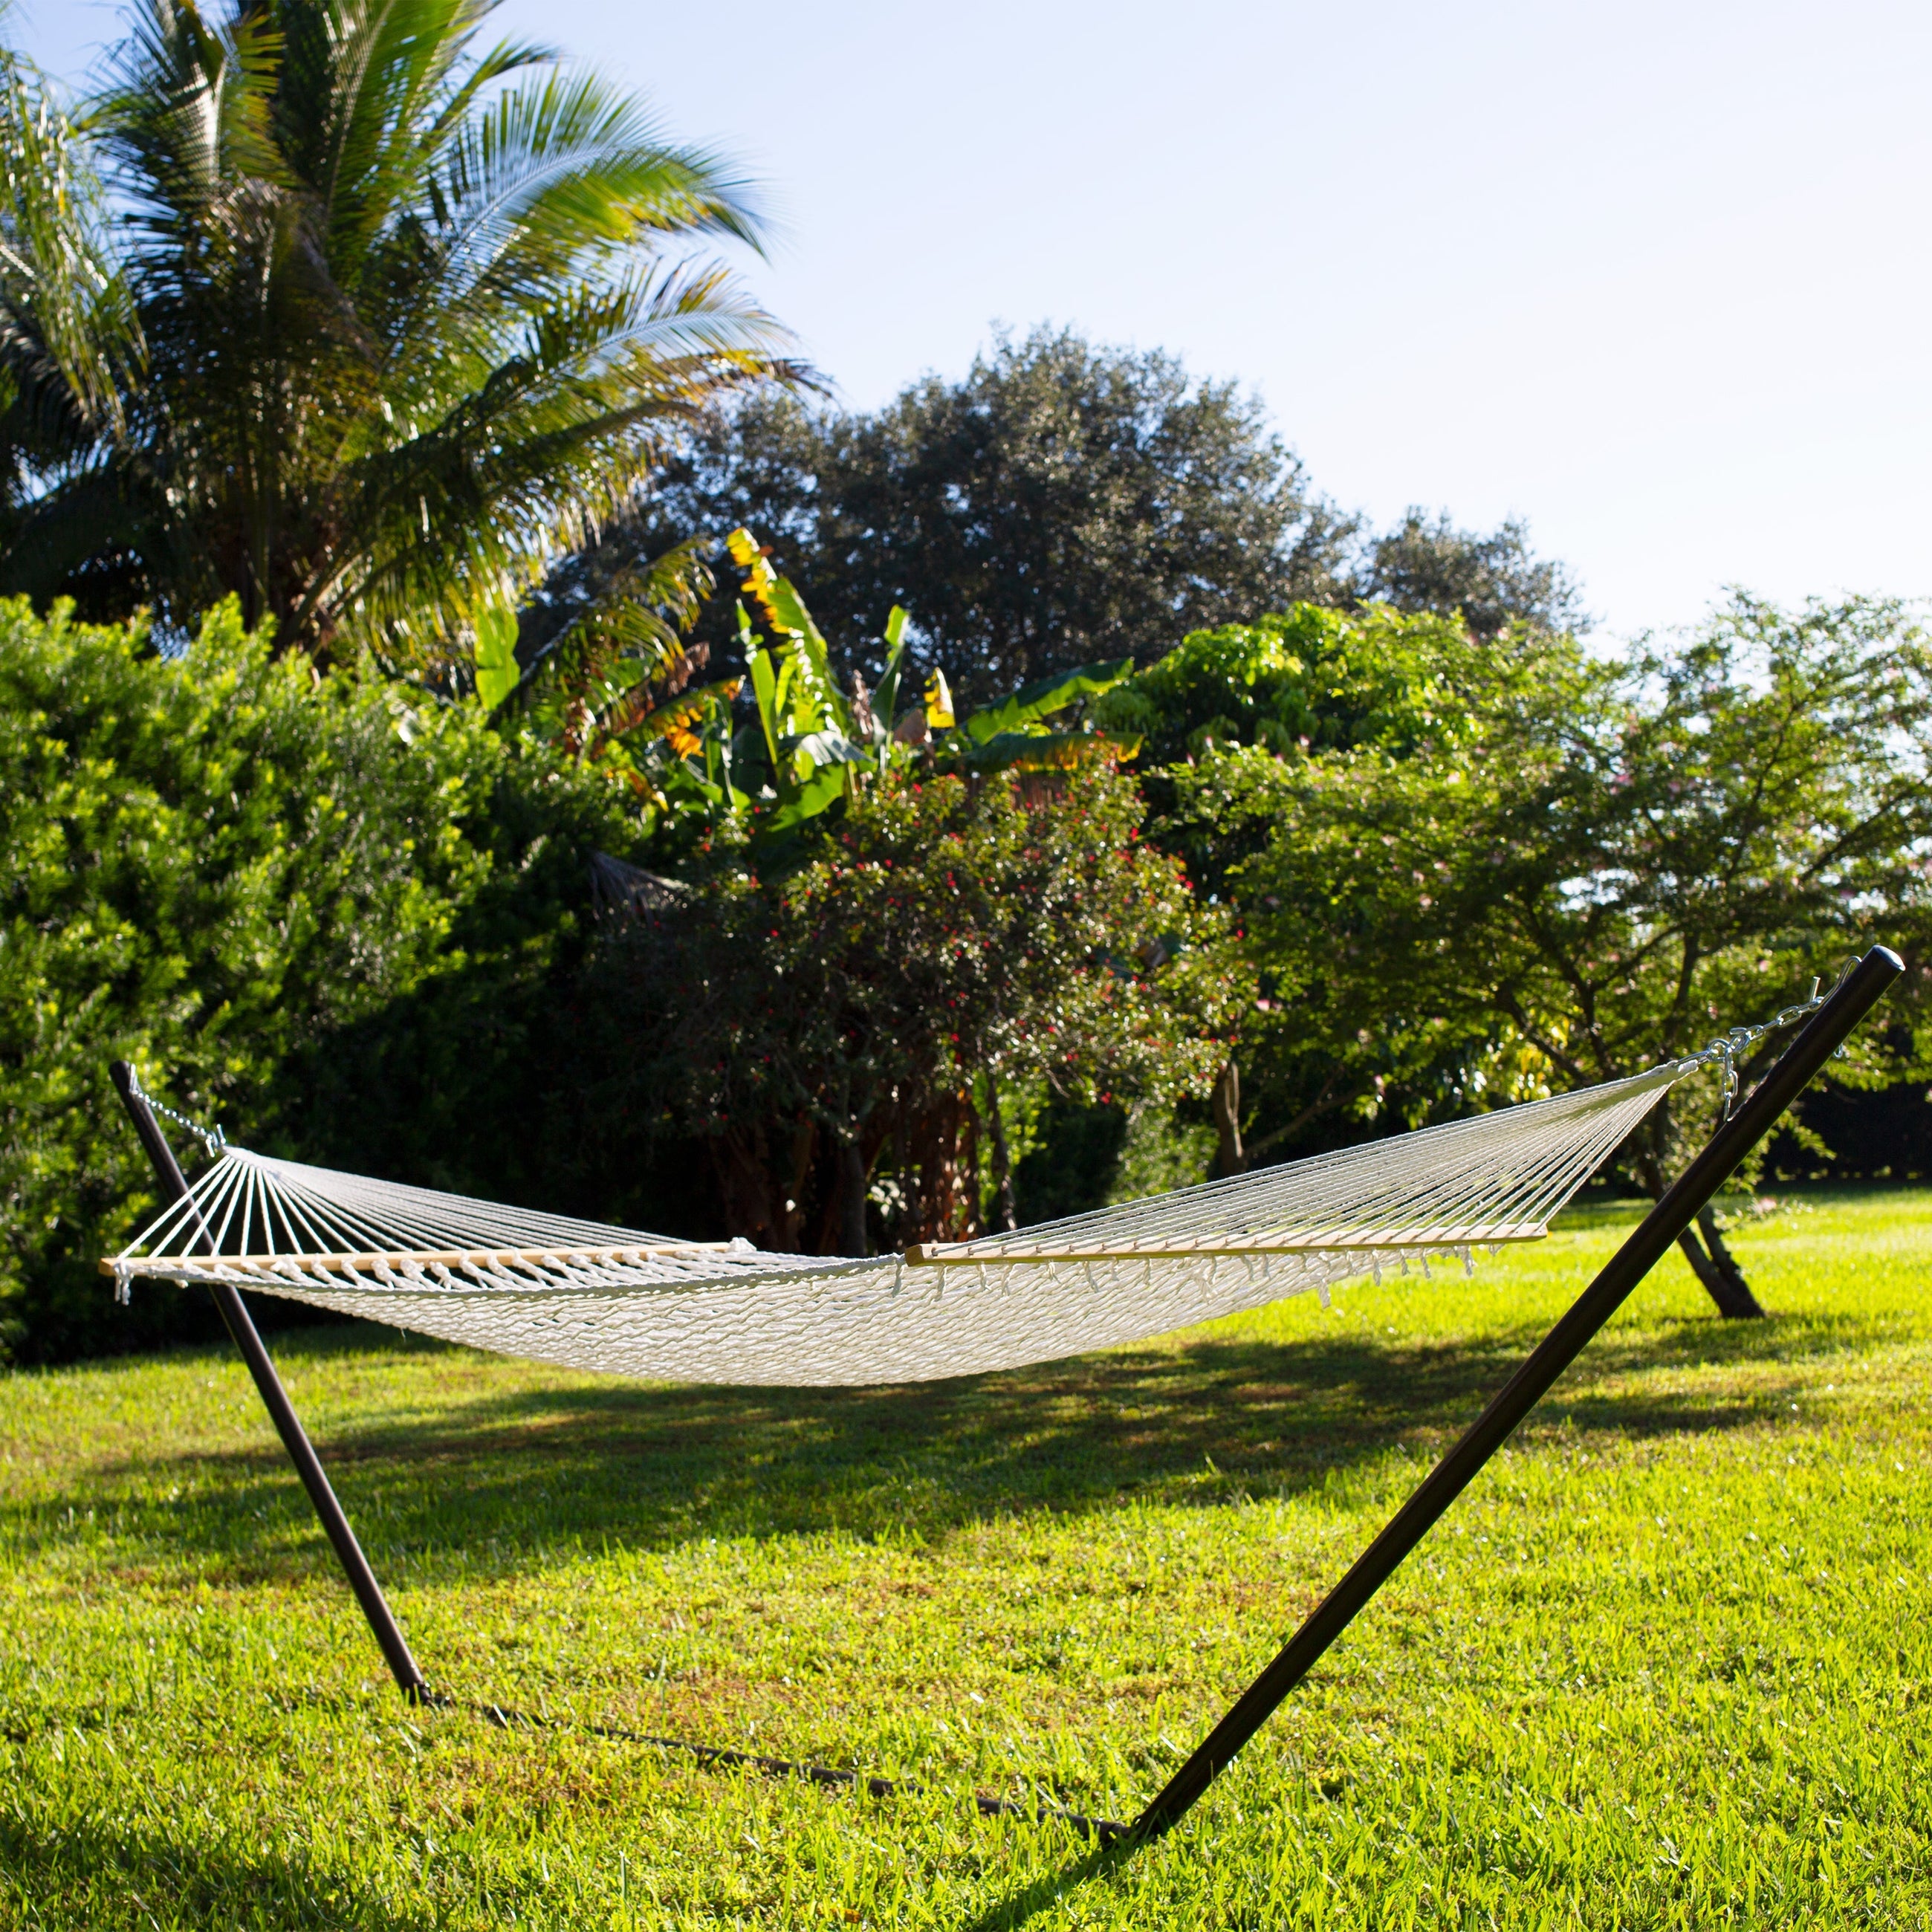 A Bliss Hammocks rope hammock and stand in a backyard on a clear day - Clearance